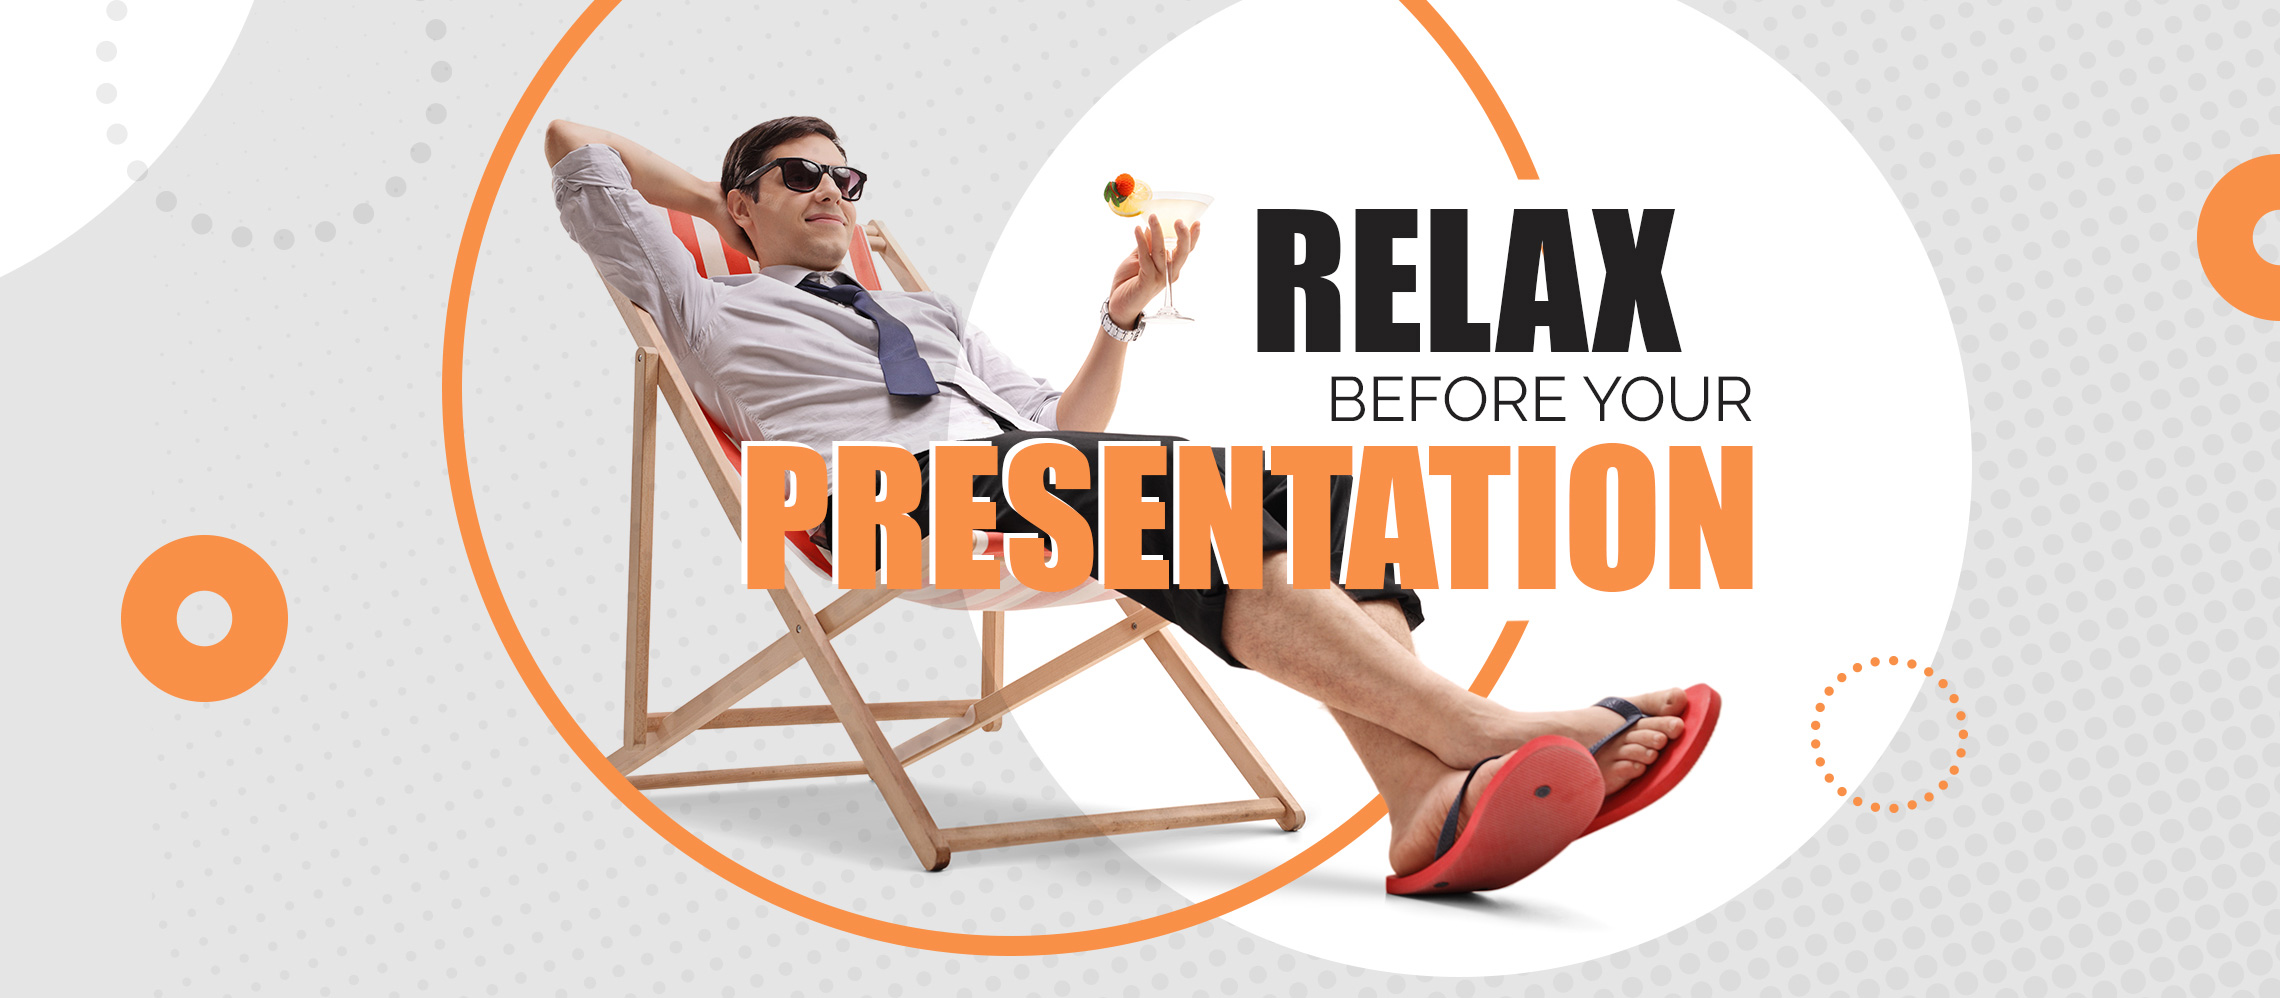 tips to relax during presentation